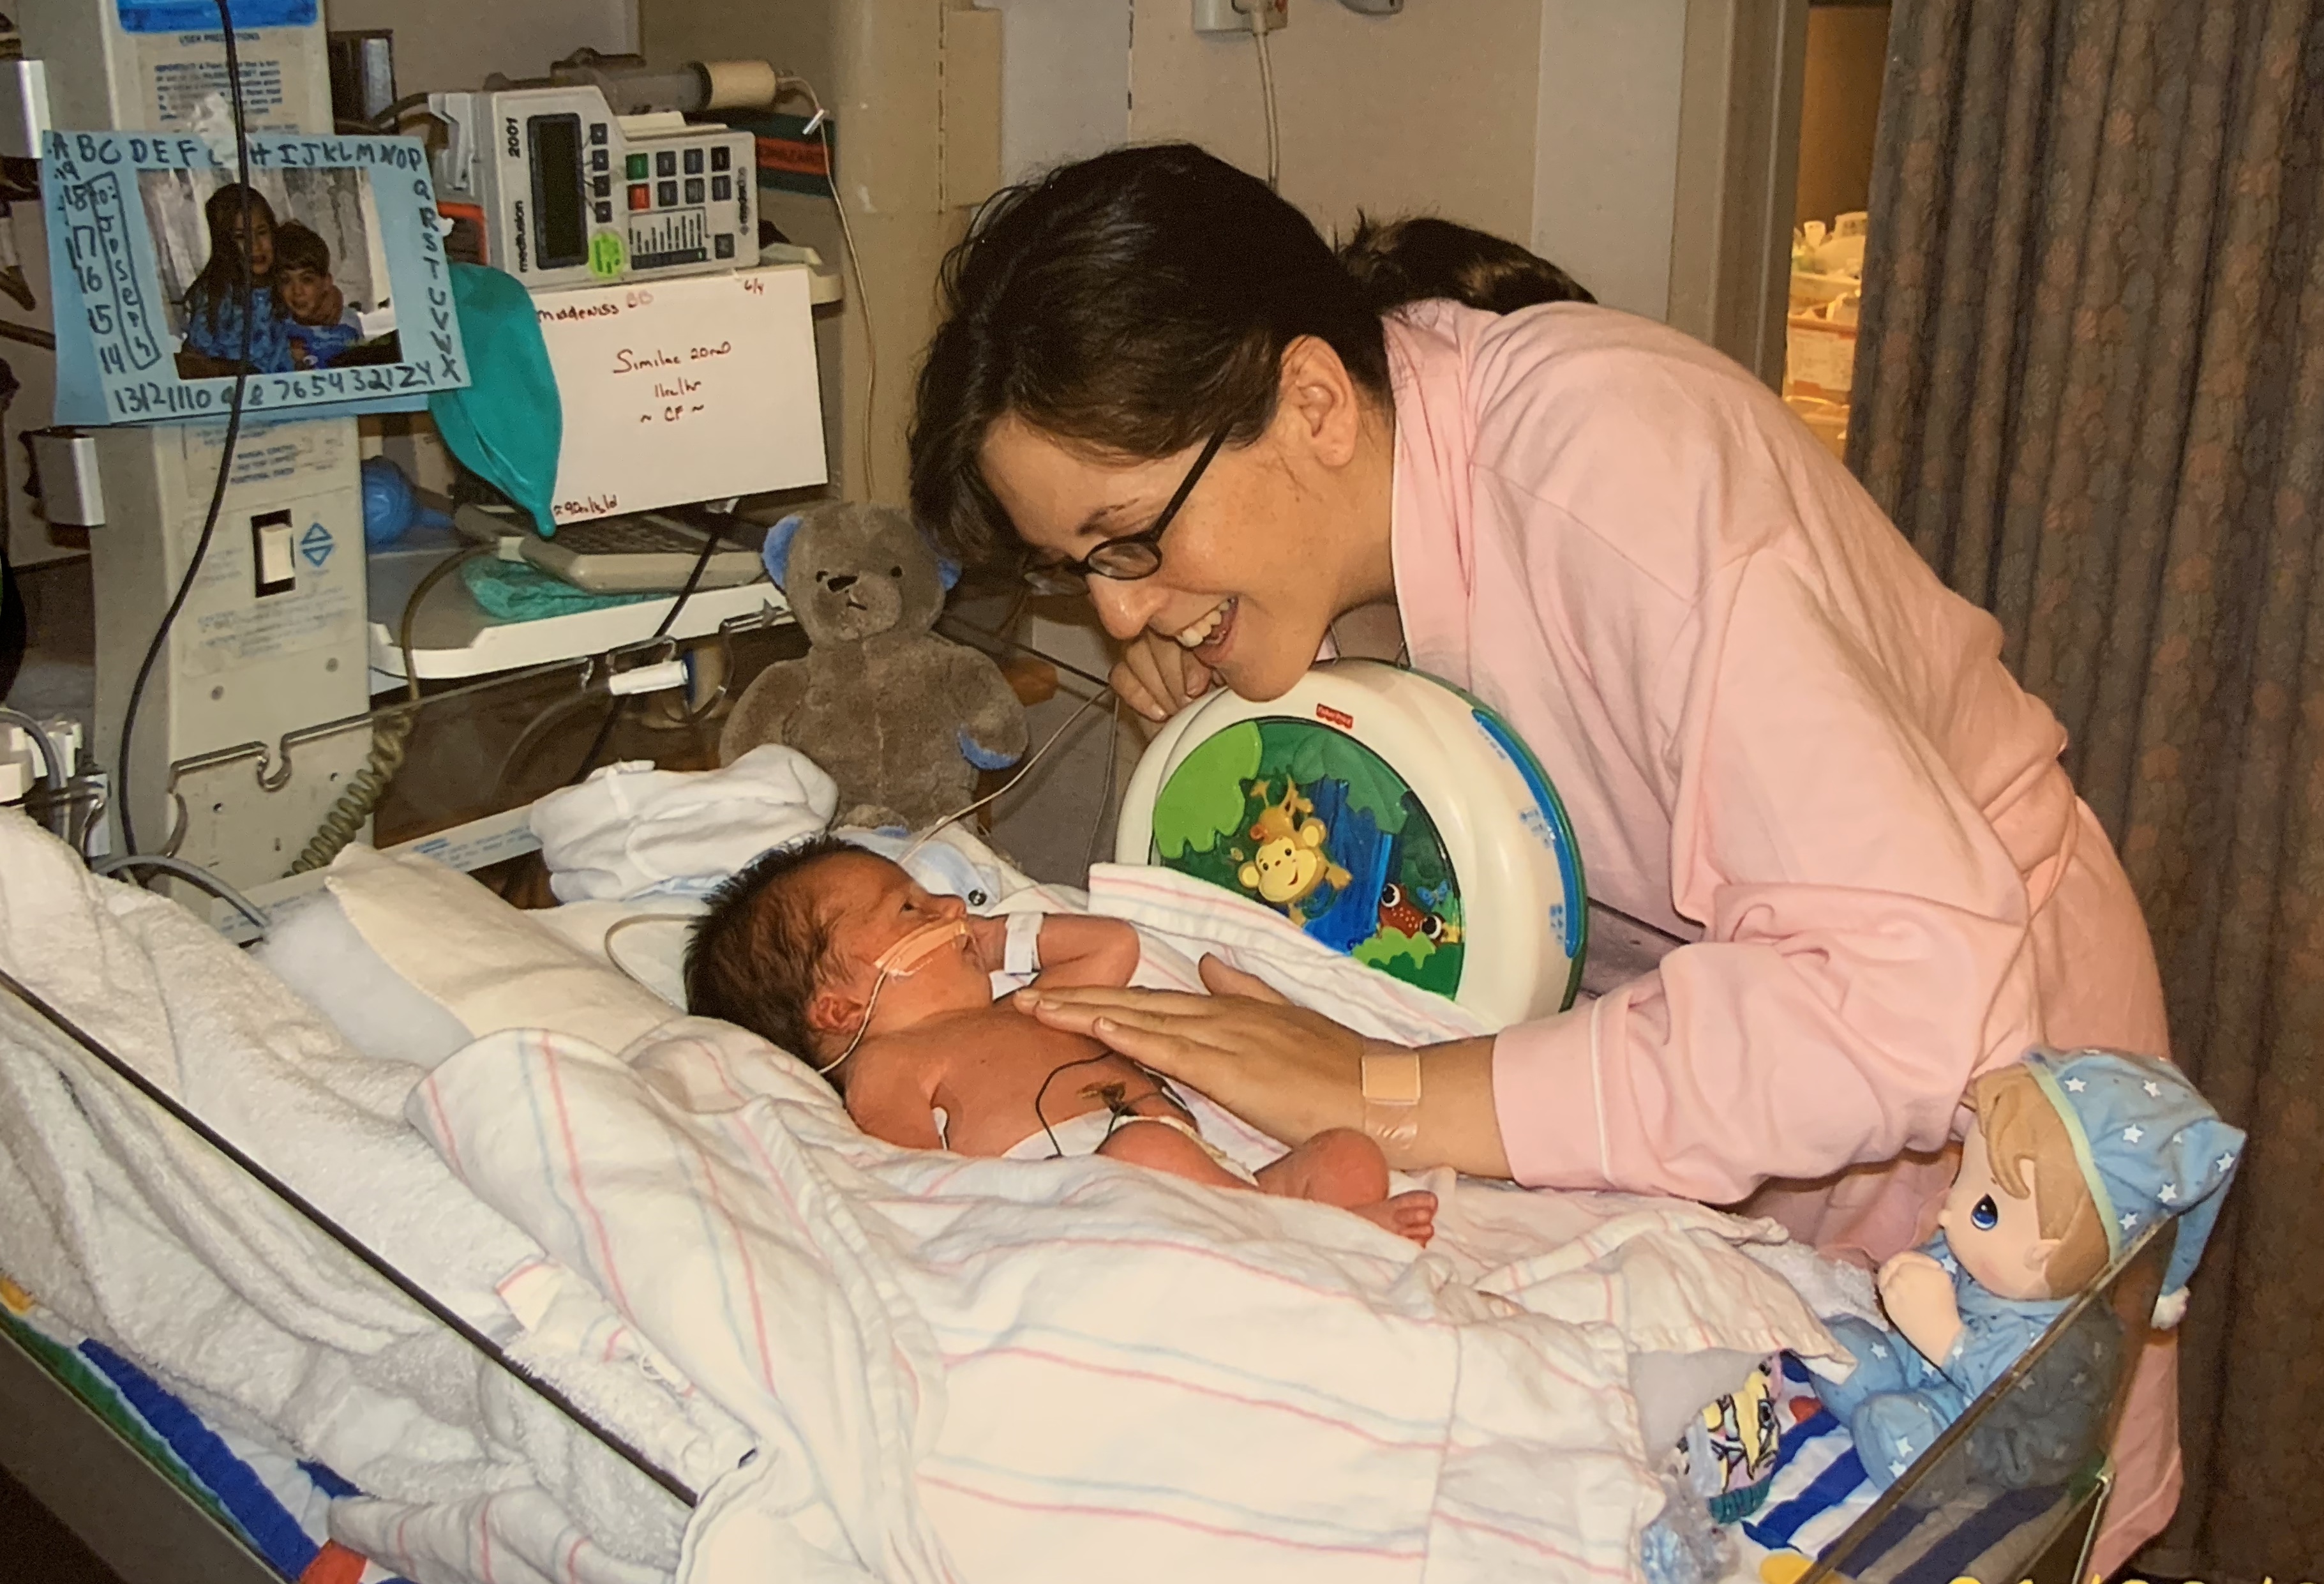 Beginning parenthood in the NICU: There wasn’t enough support for us.